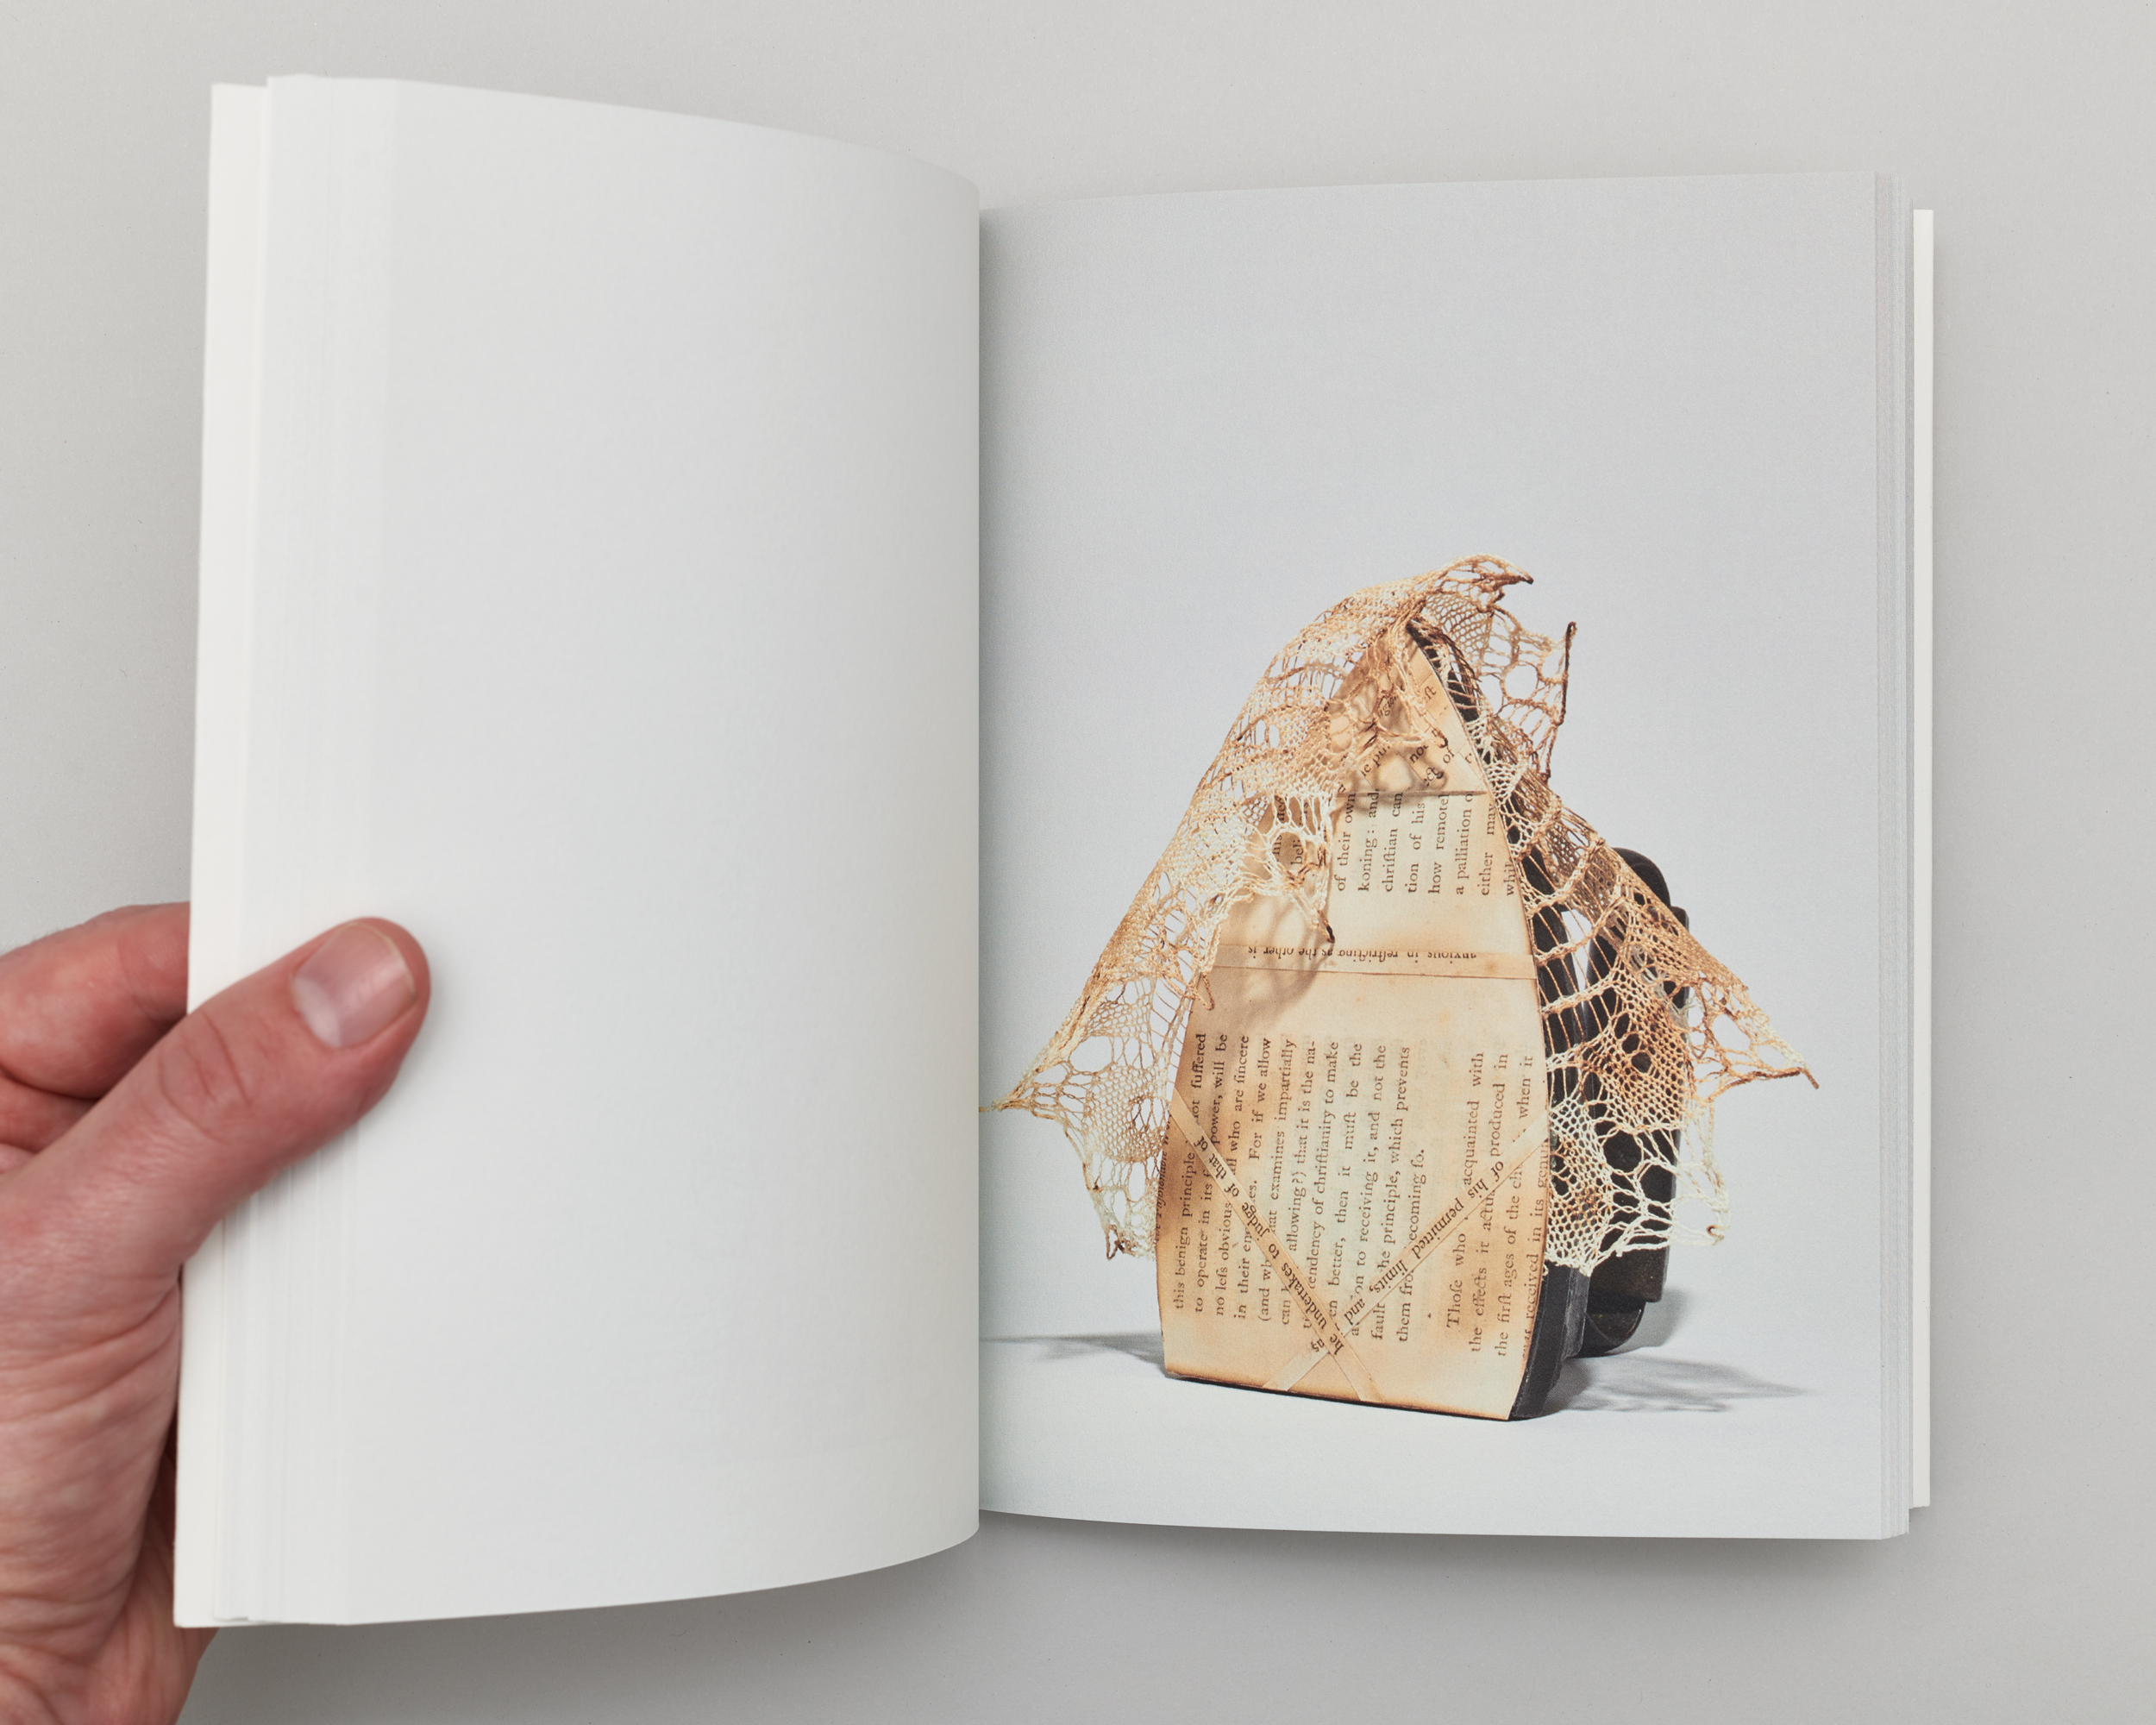 Open book with a photograph of an iron on the right page. The iron's base is covered with book pages and wrapped in lace.